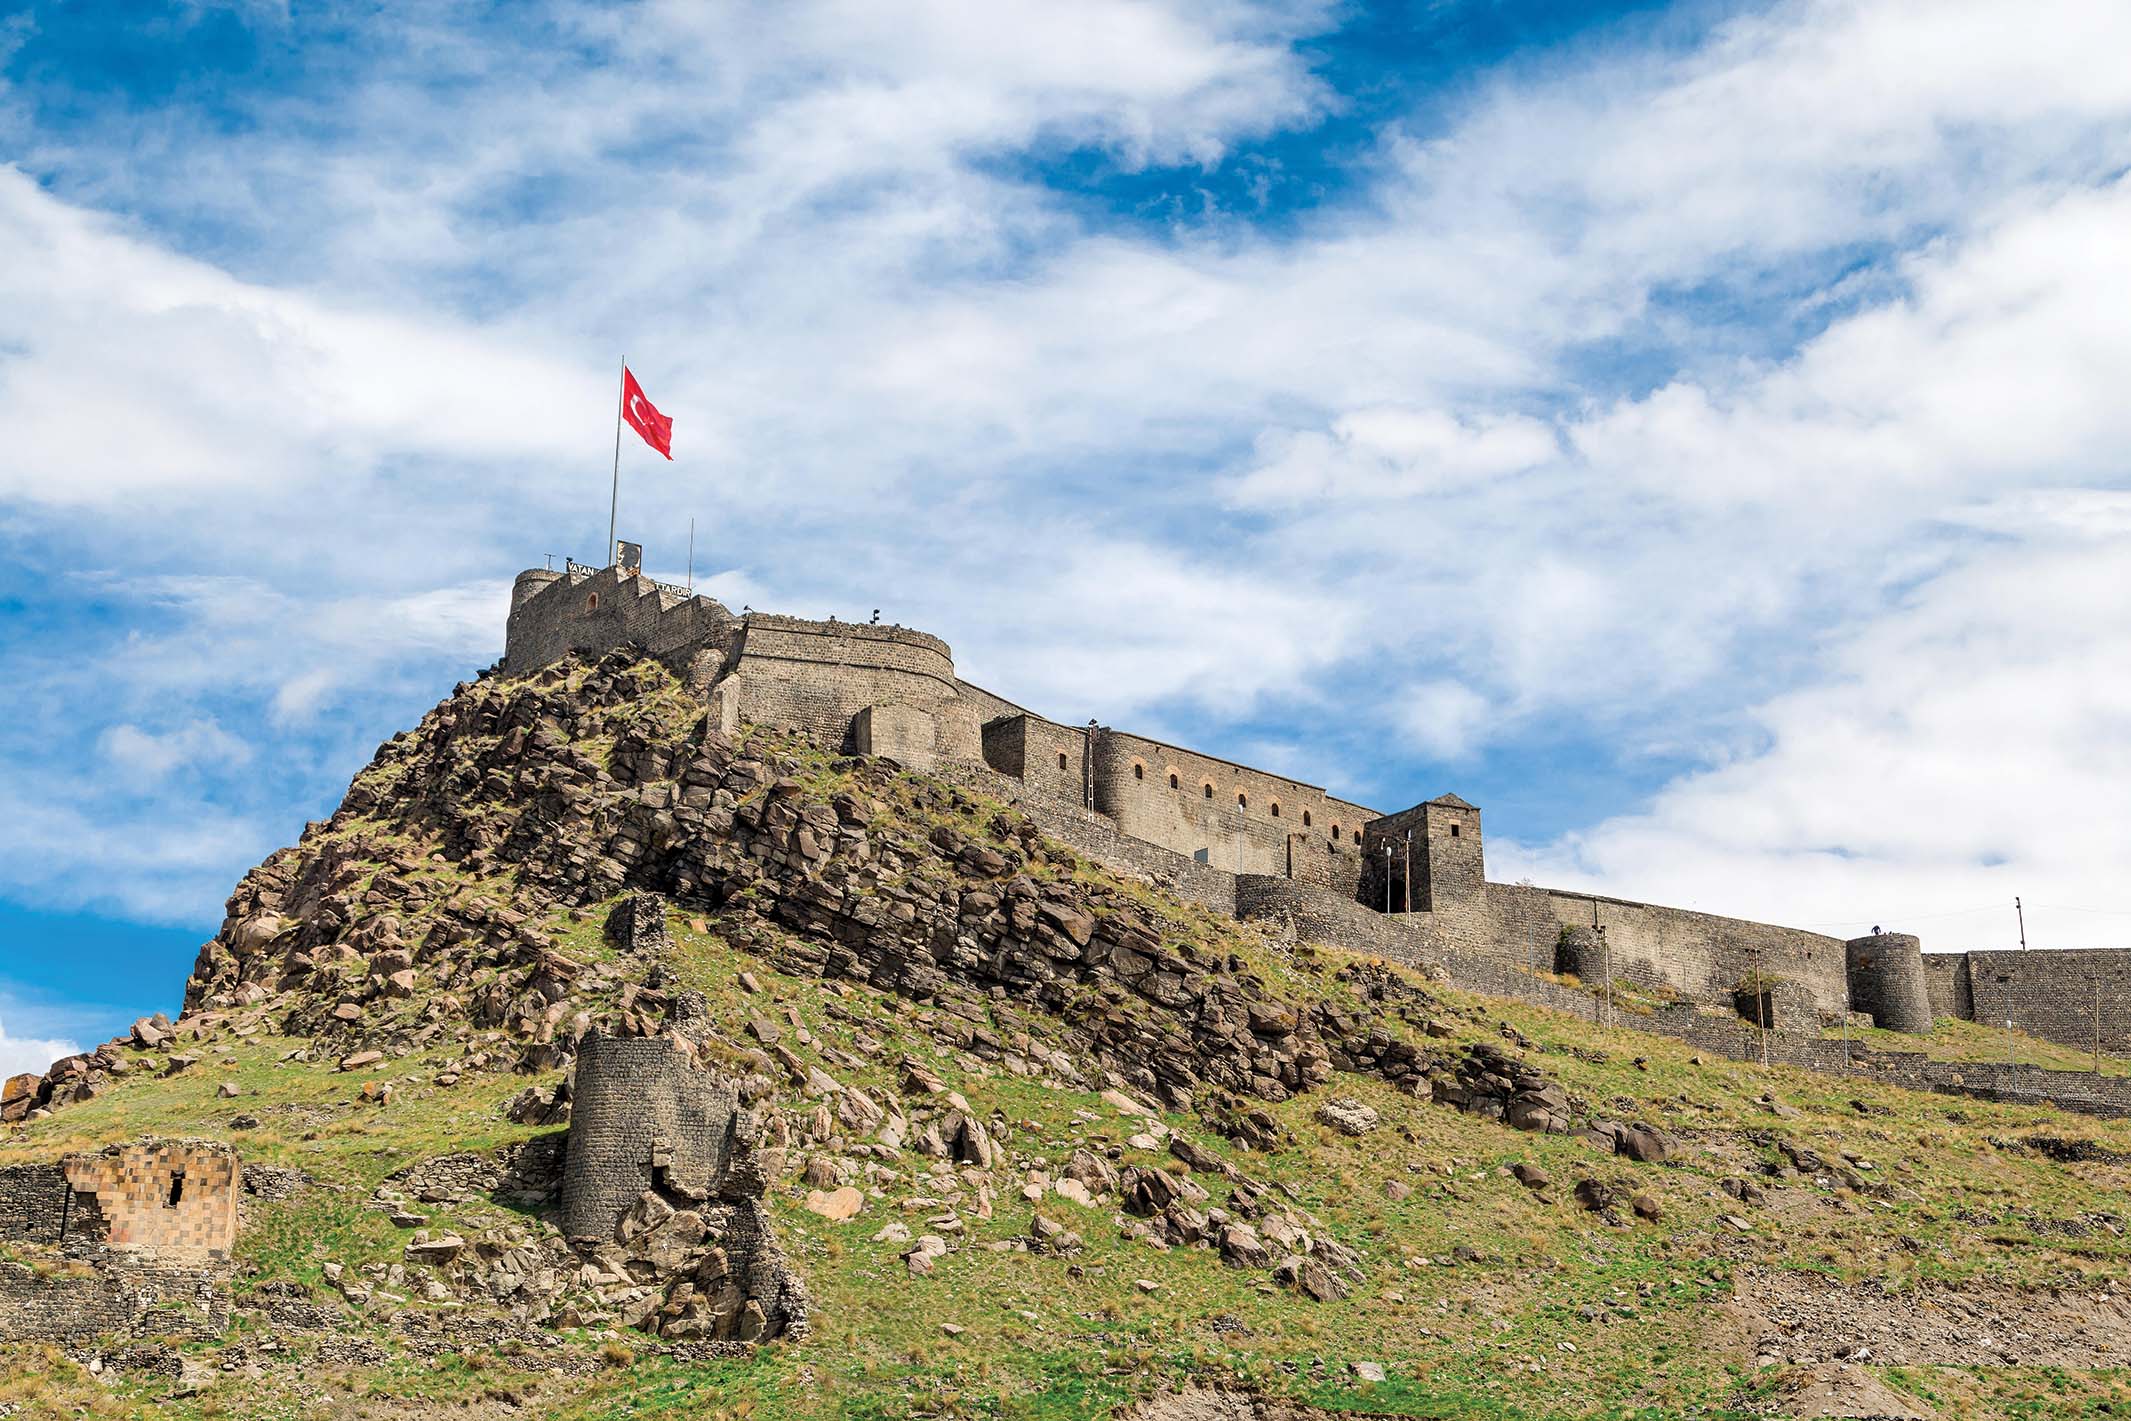 Though Kars fortress is a popular destination among foreign tourists, its contentious history remains a bitter pill for Armenians to swallow. / Ekin Yalgin (Alamy stock photo)